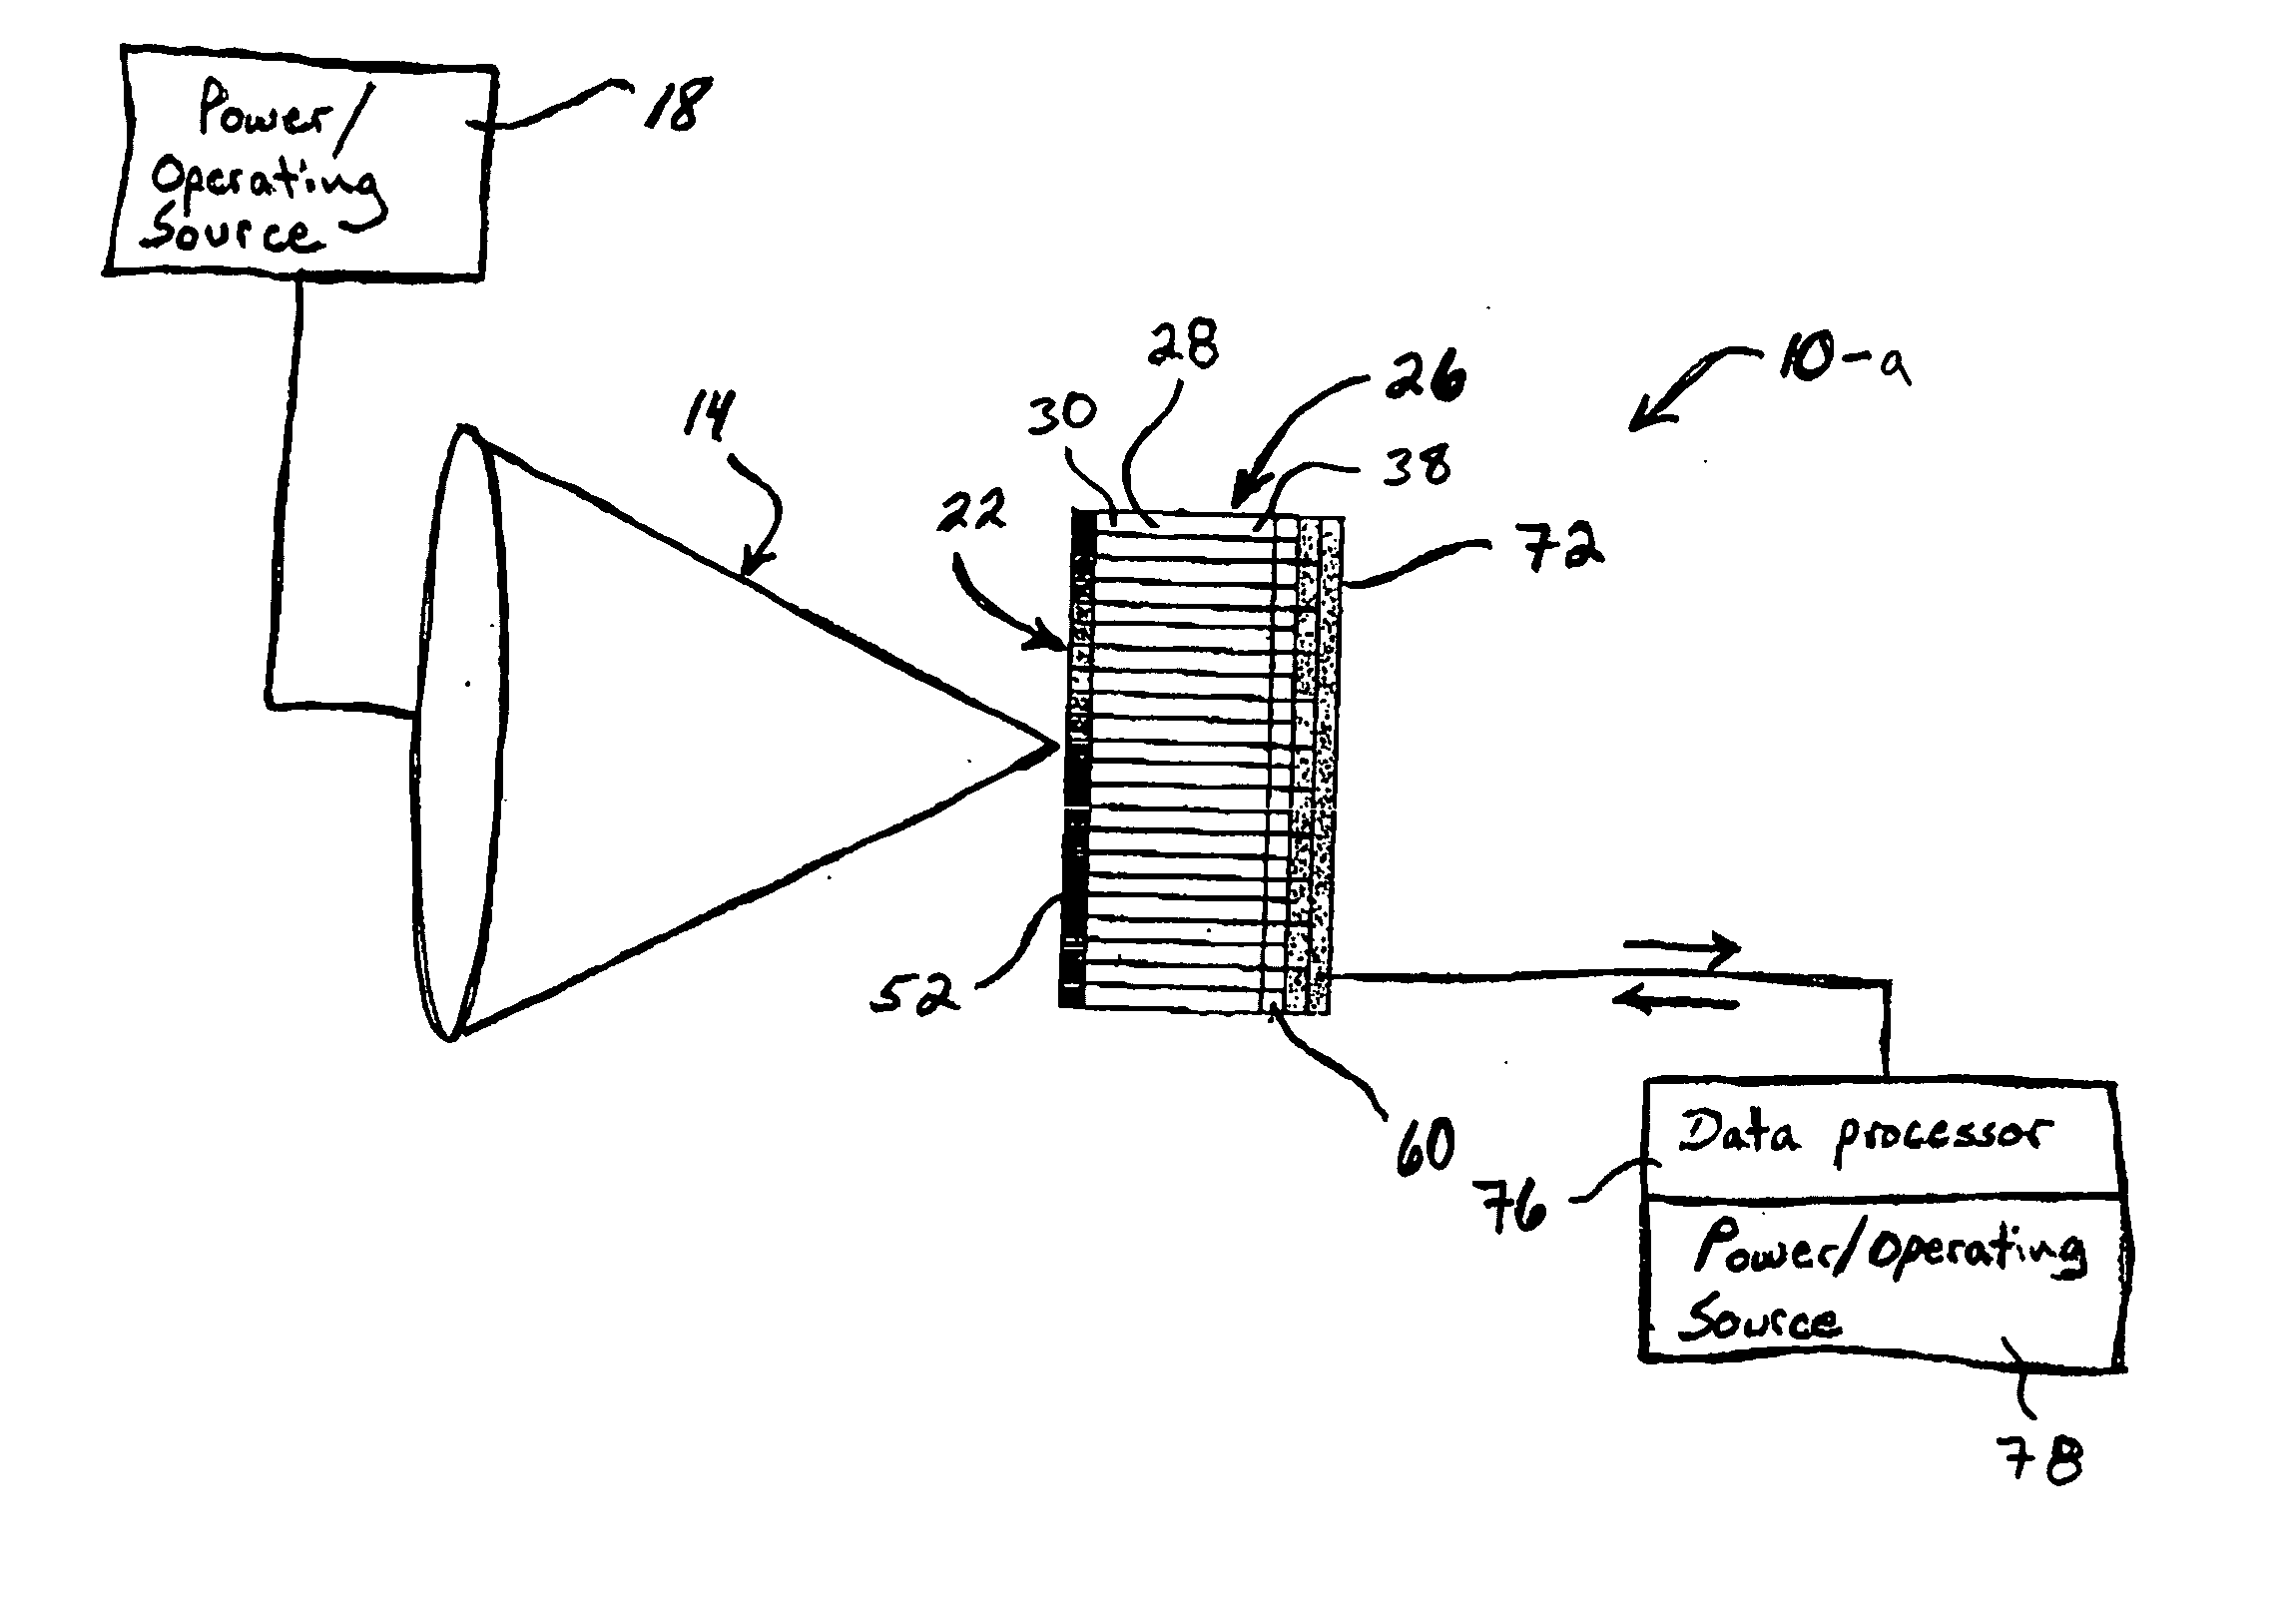 Spectral selection and image conveyance using micro filters and optical fibers